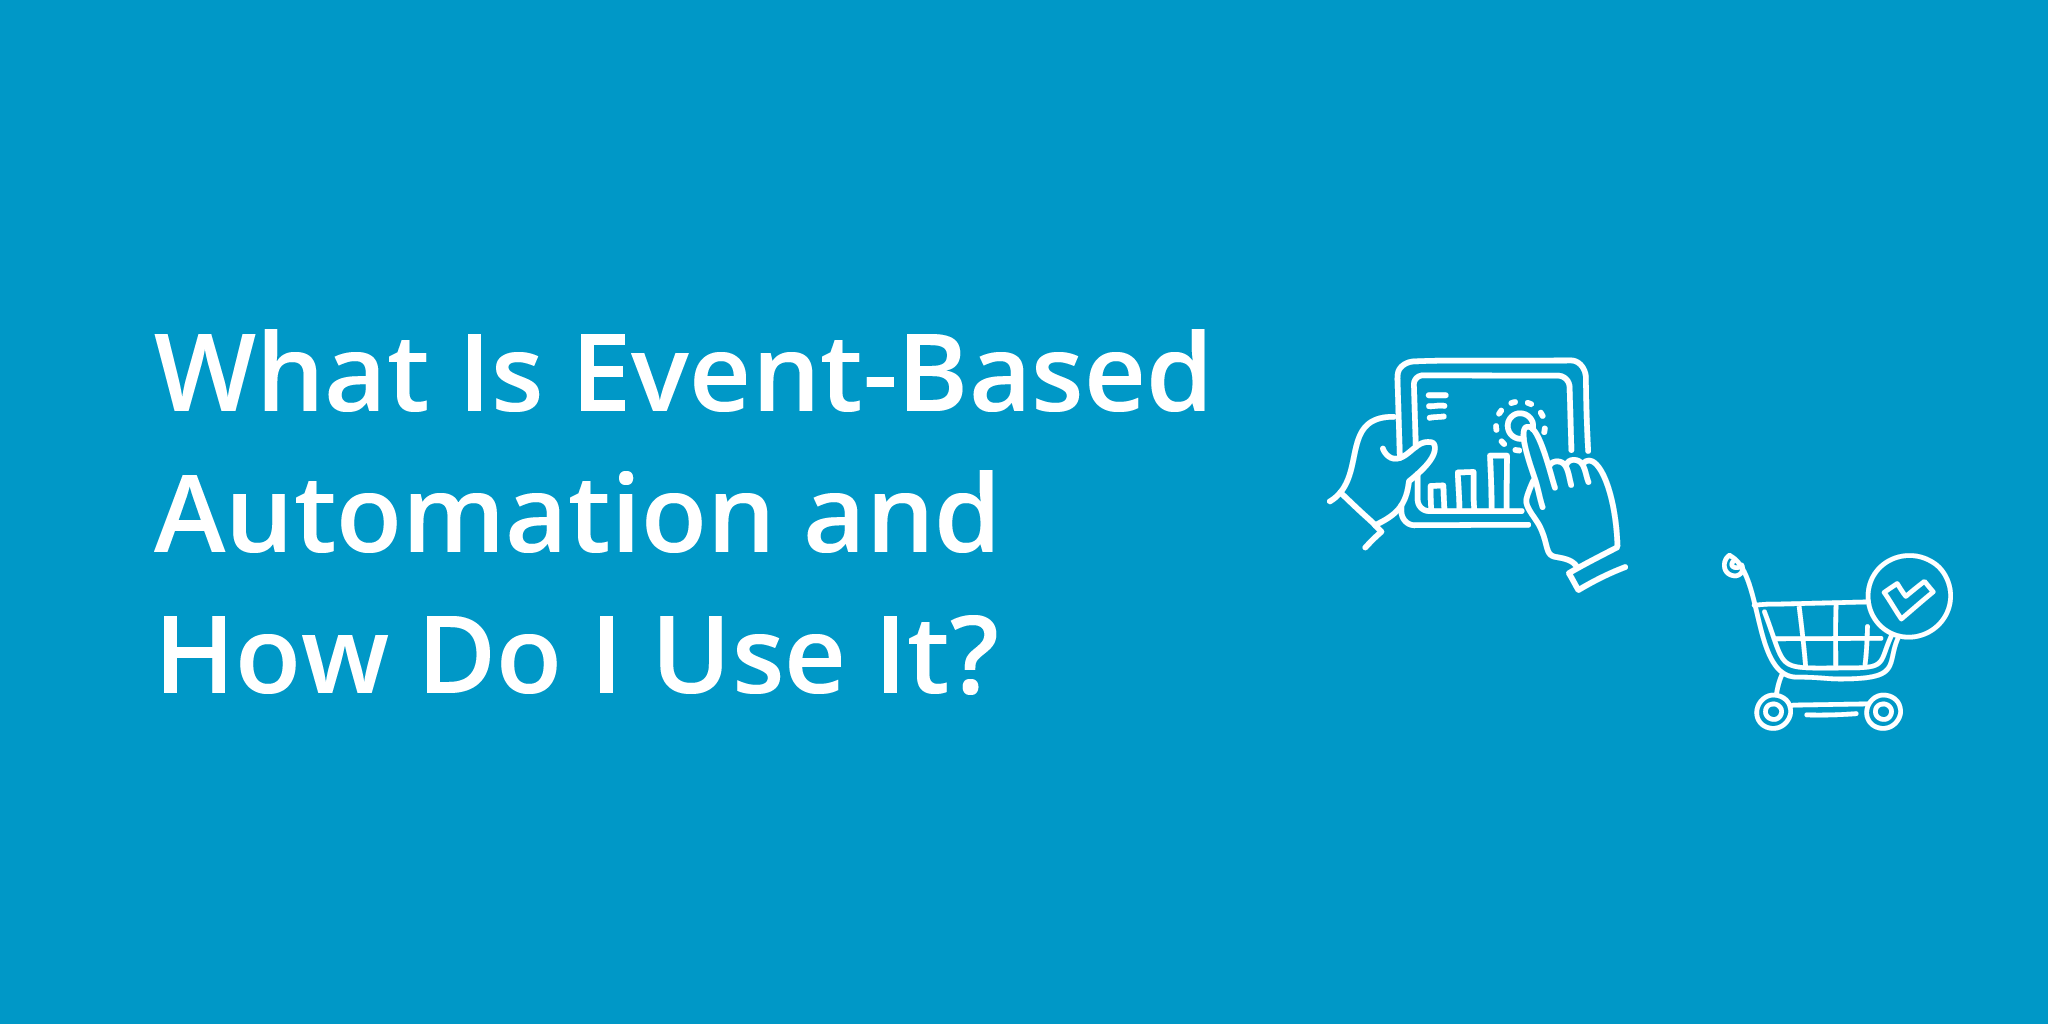 What Is Event-Based Automation and How Do I Use It?